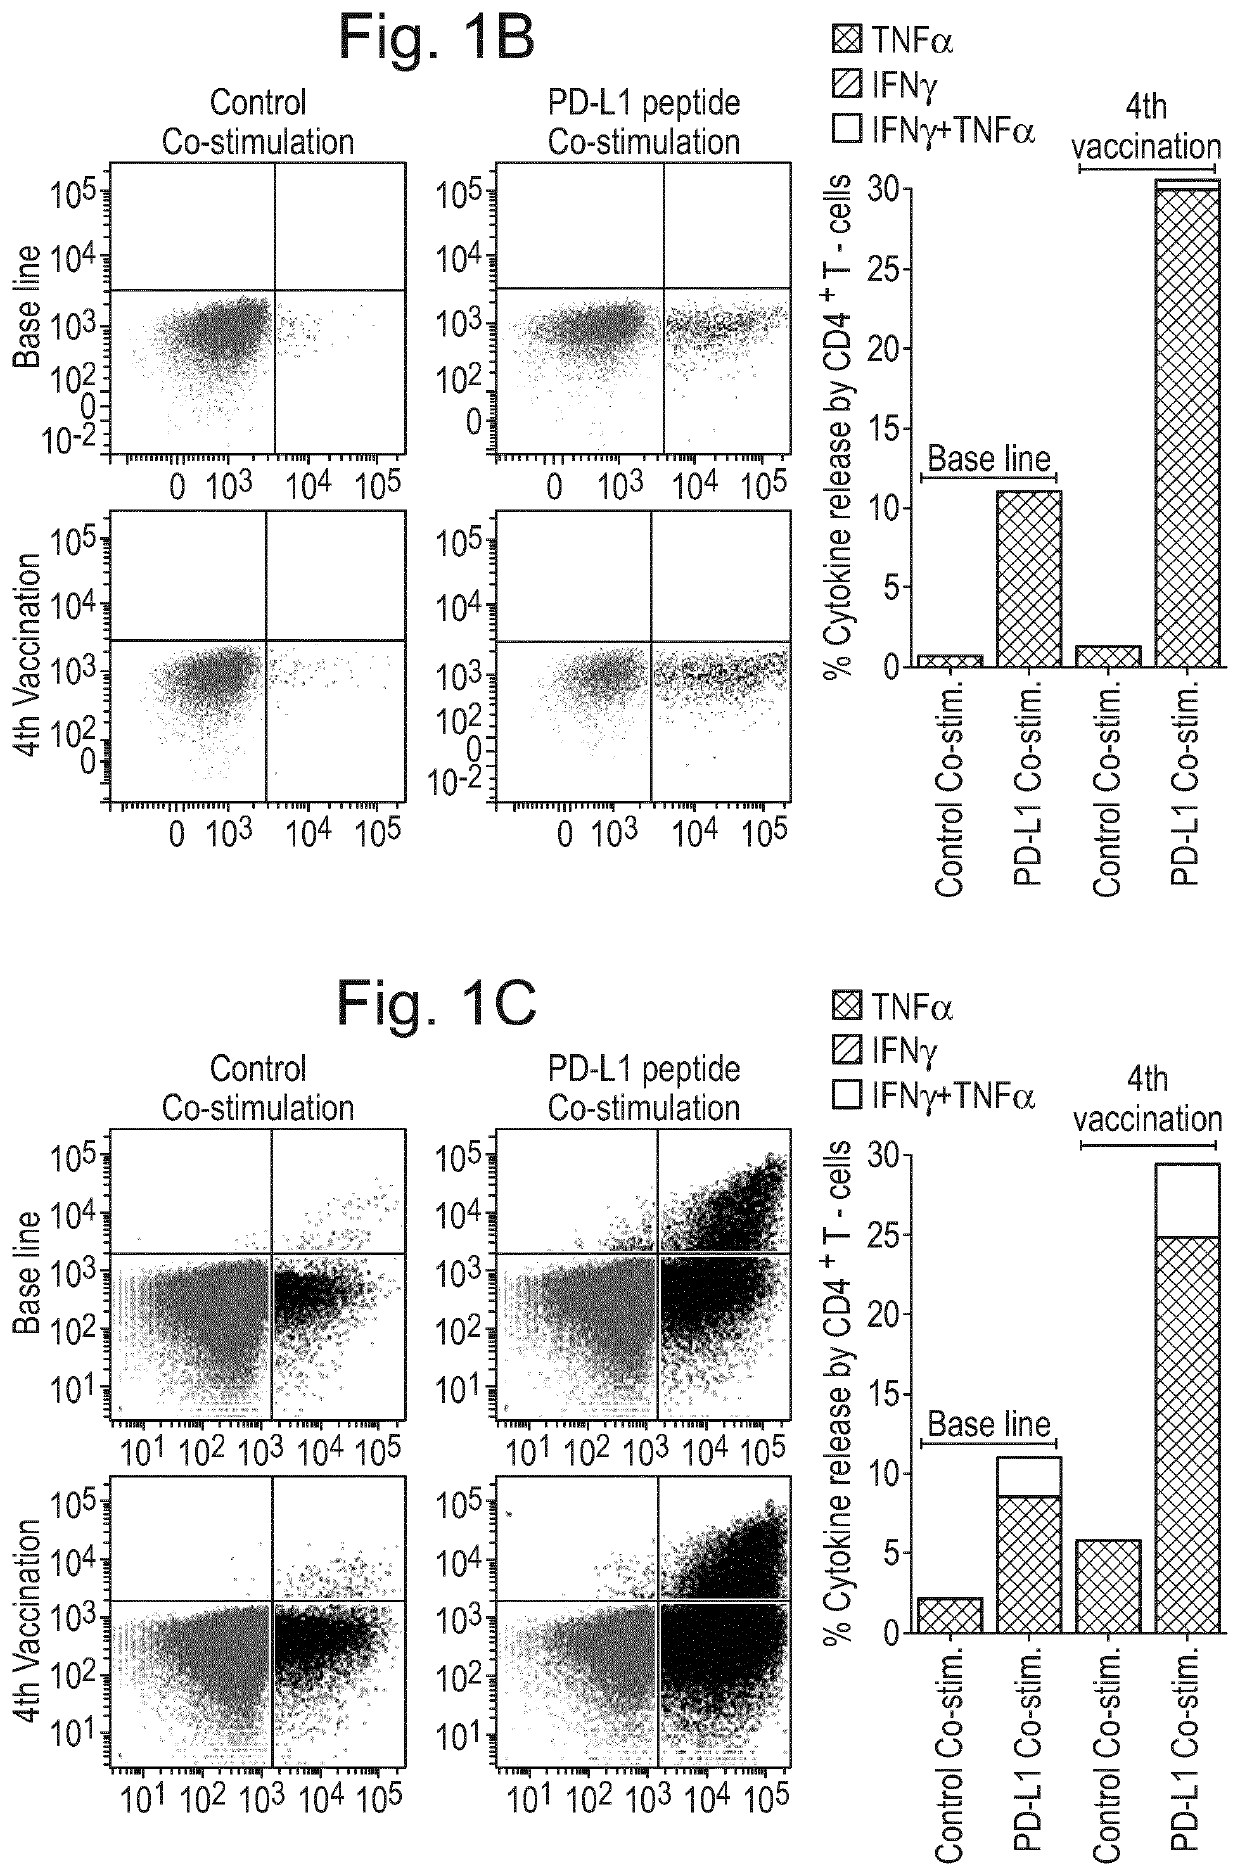 Pdl1 peptides for use in cancer vaccines